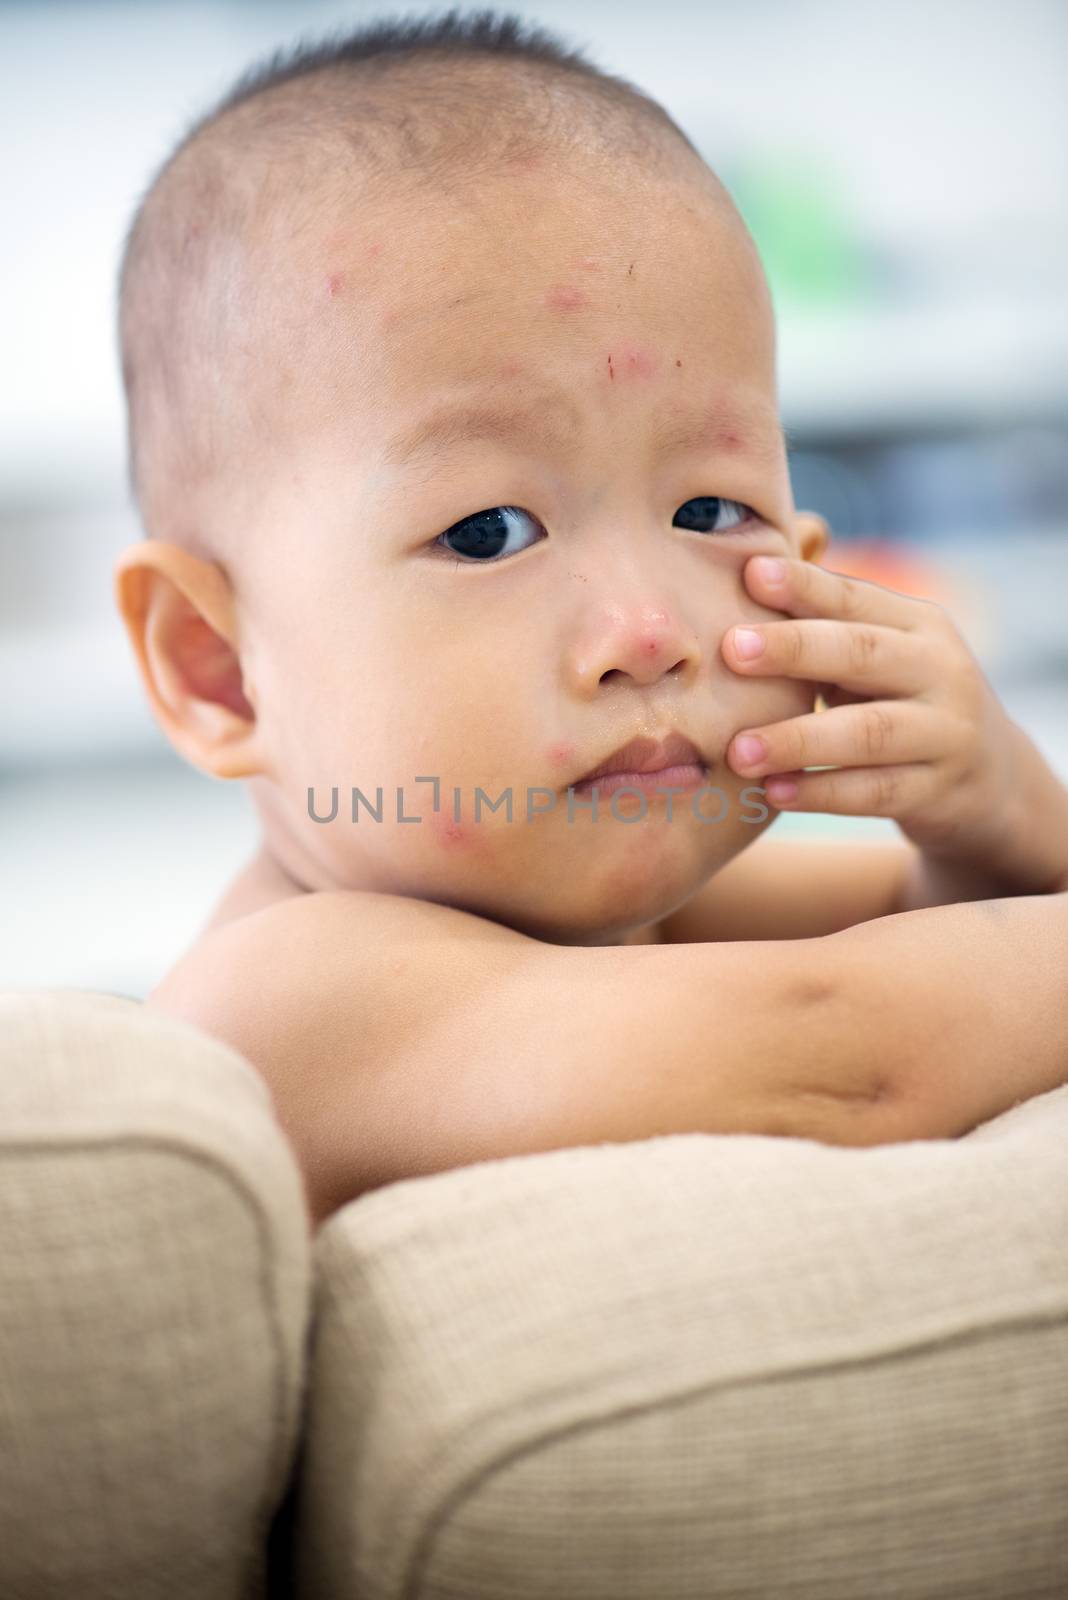 Asian baby sitting on couch with chicken pox rash, natural photo.